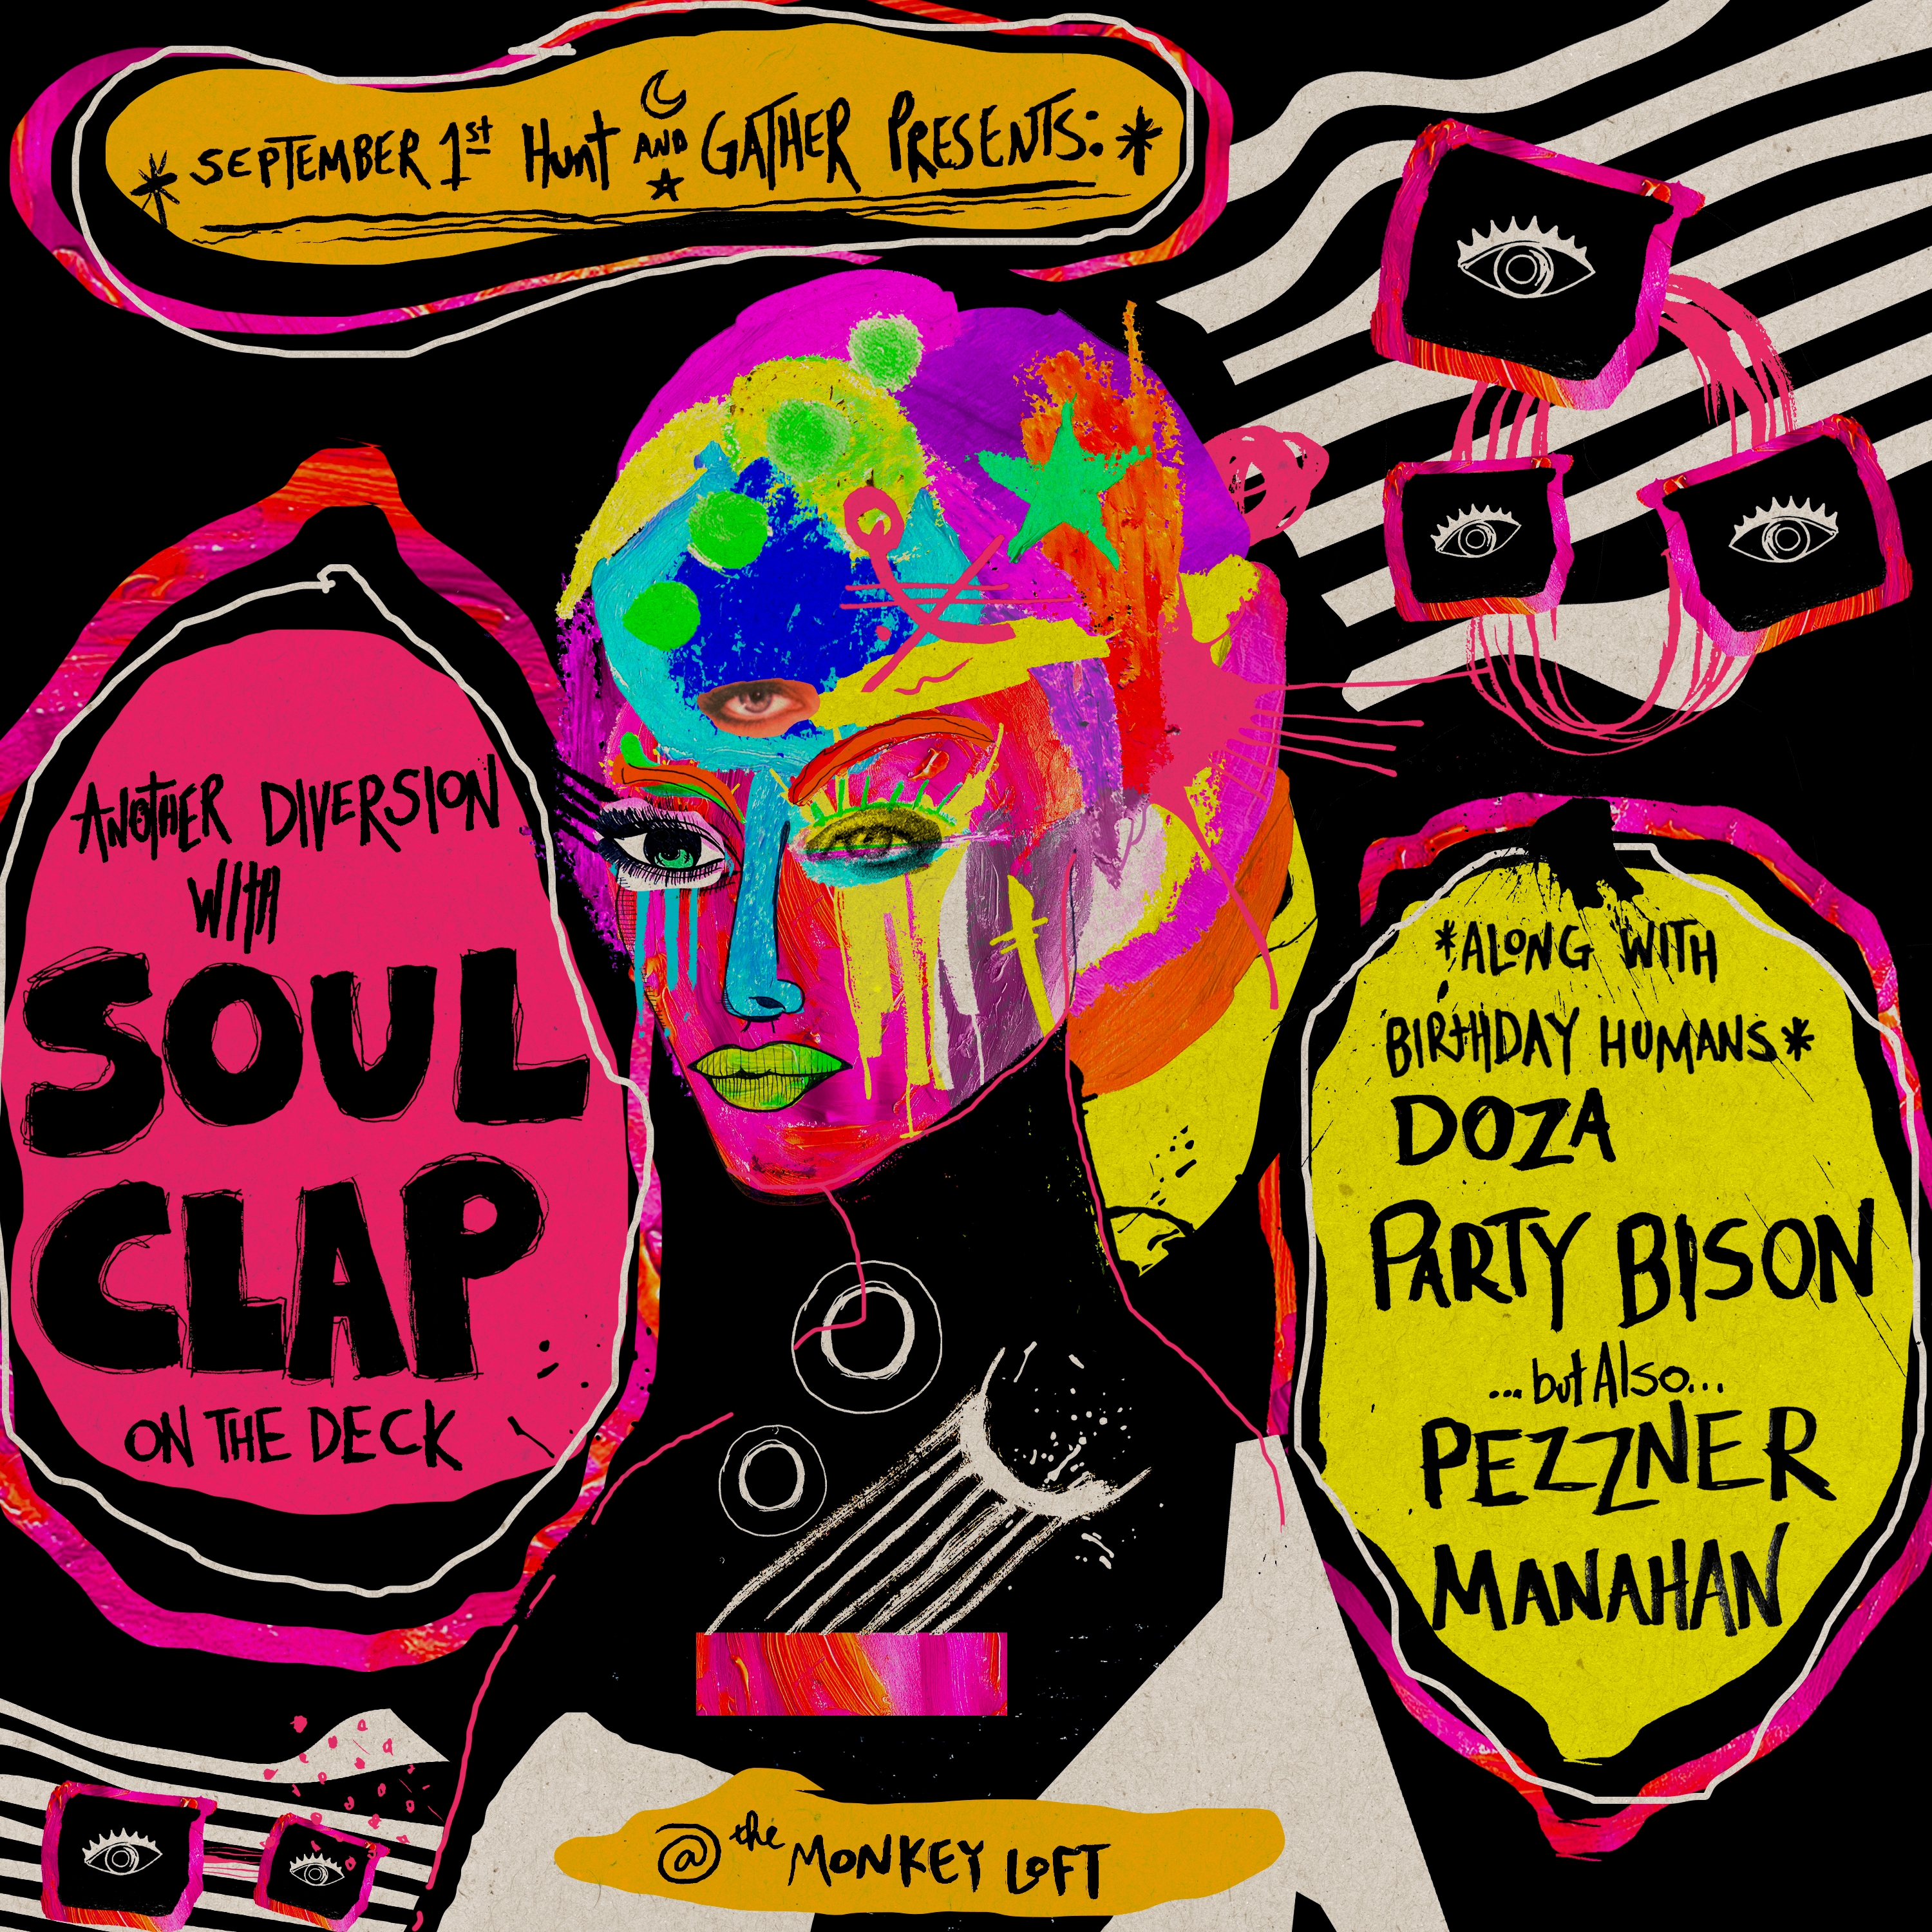 Hunt & Gather presents: Soul Clap with Doza, Party Bison, Pezzner & Manahan - フライヤー表